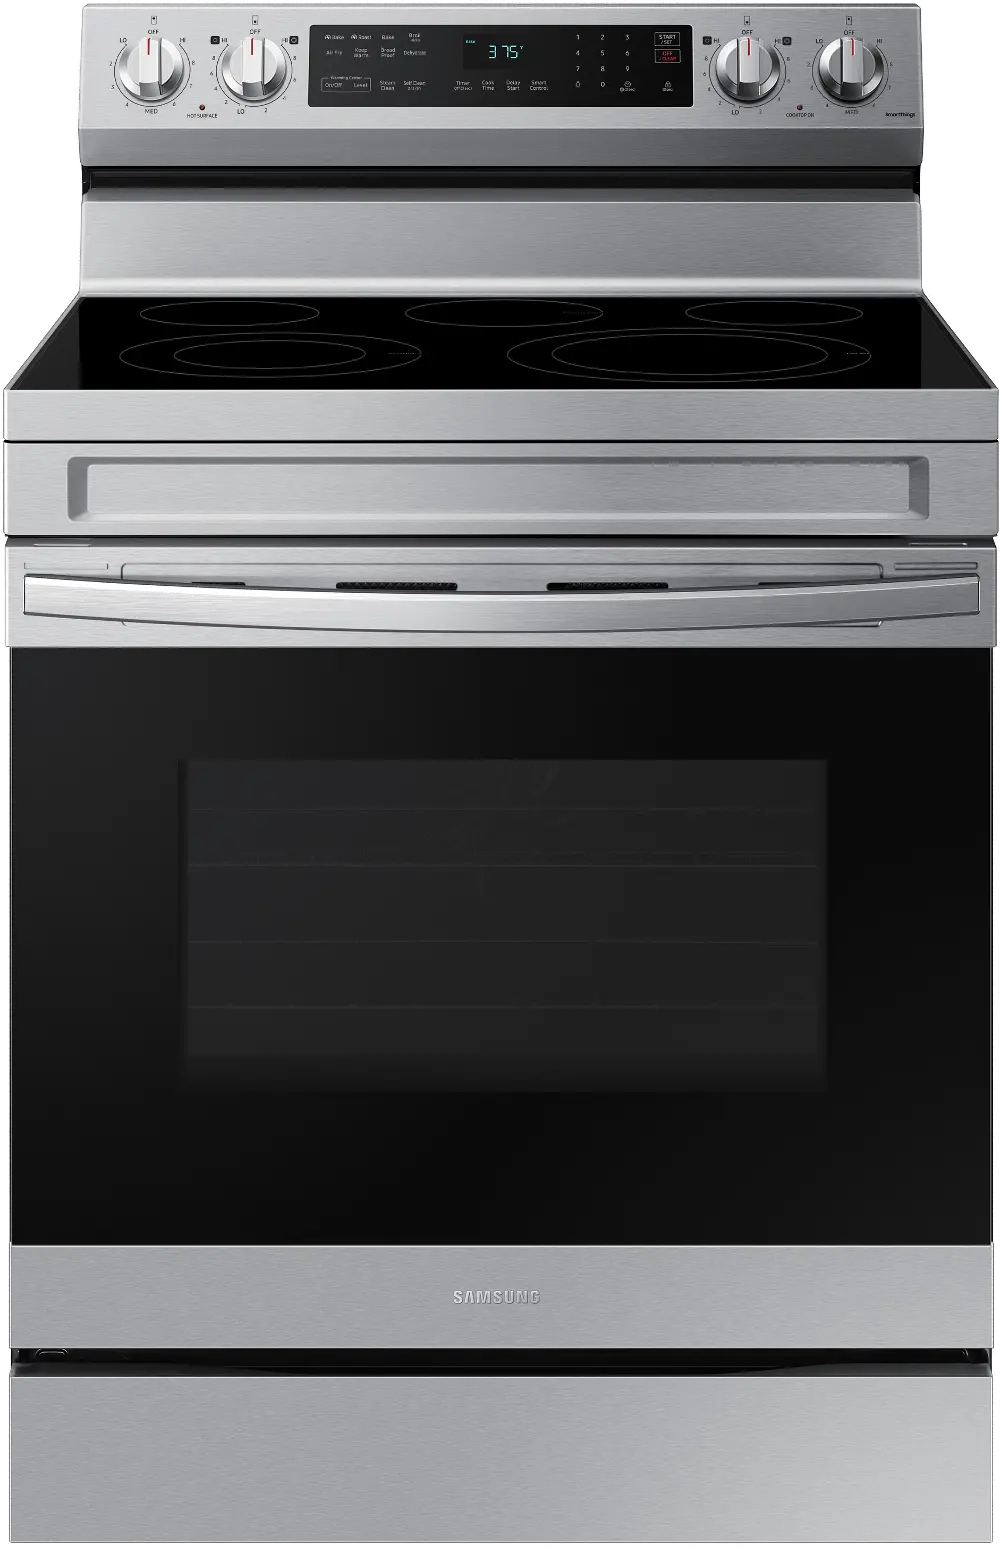 NE63A6511SS Samsung 6.3 cu ft Electric Range - Stainless Steel-1